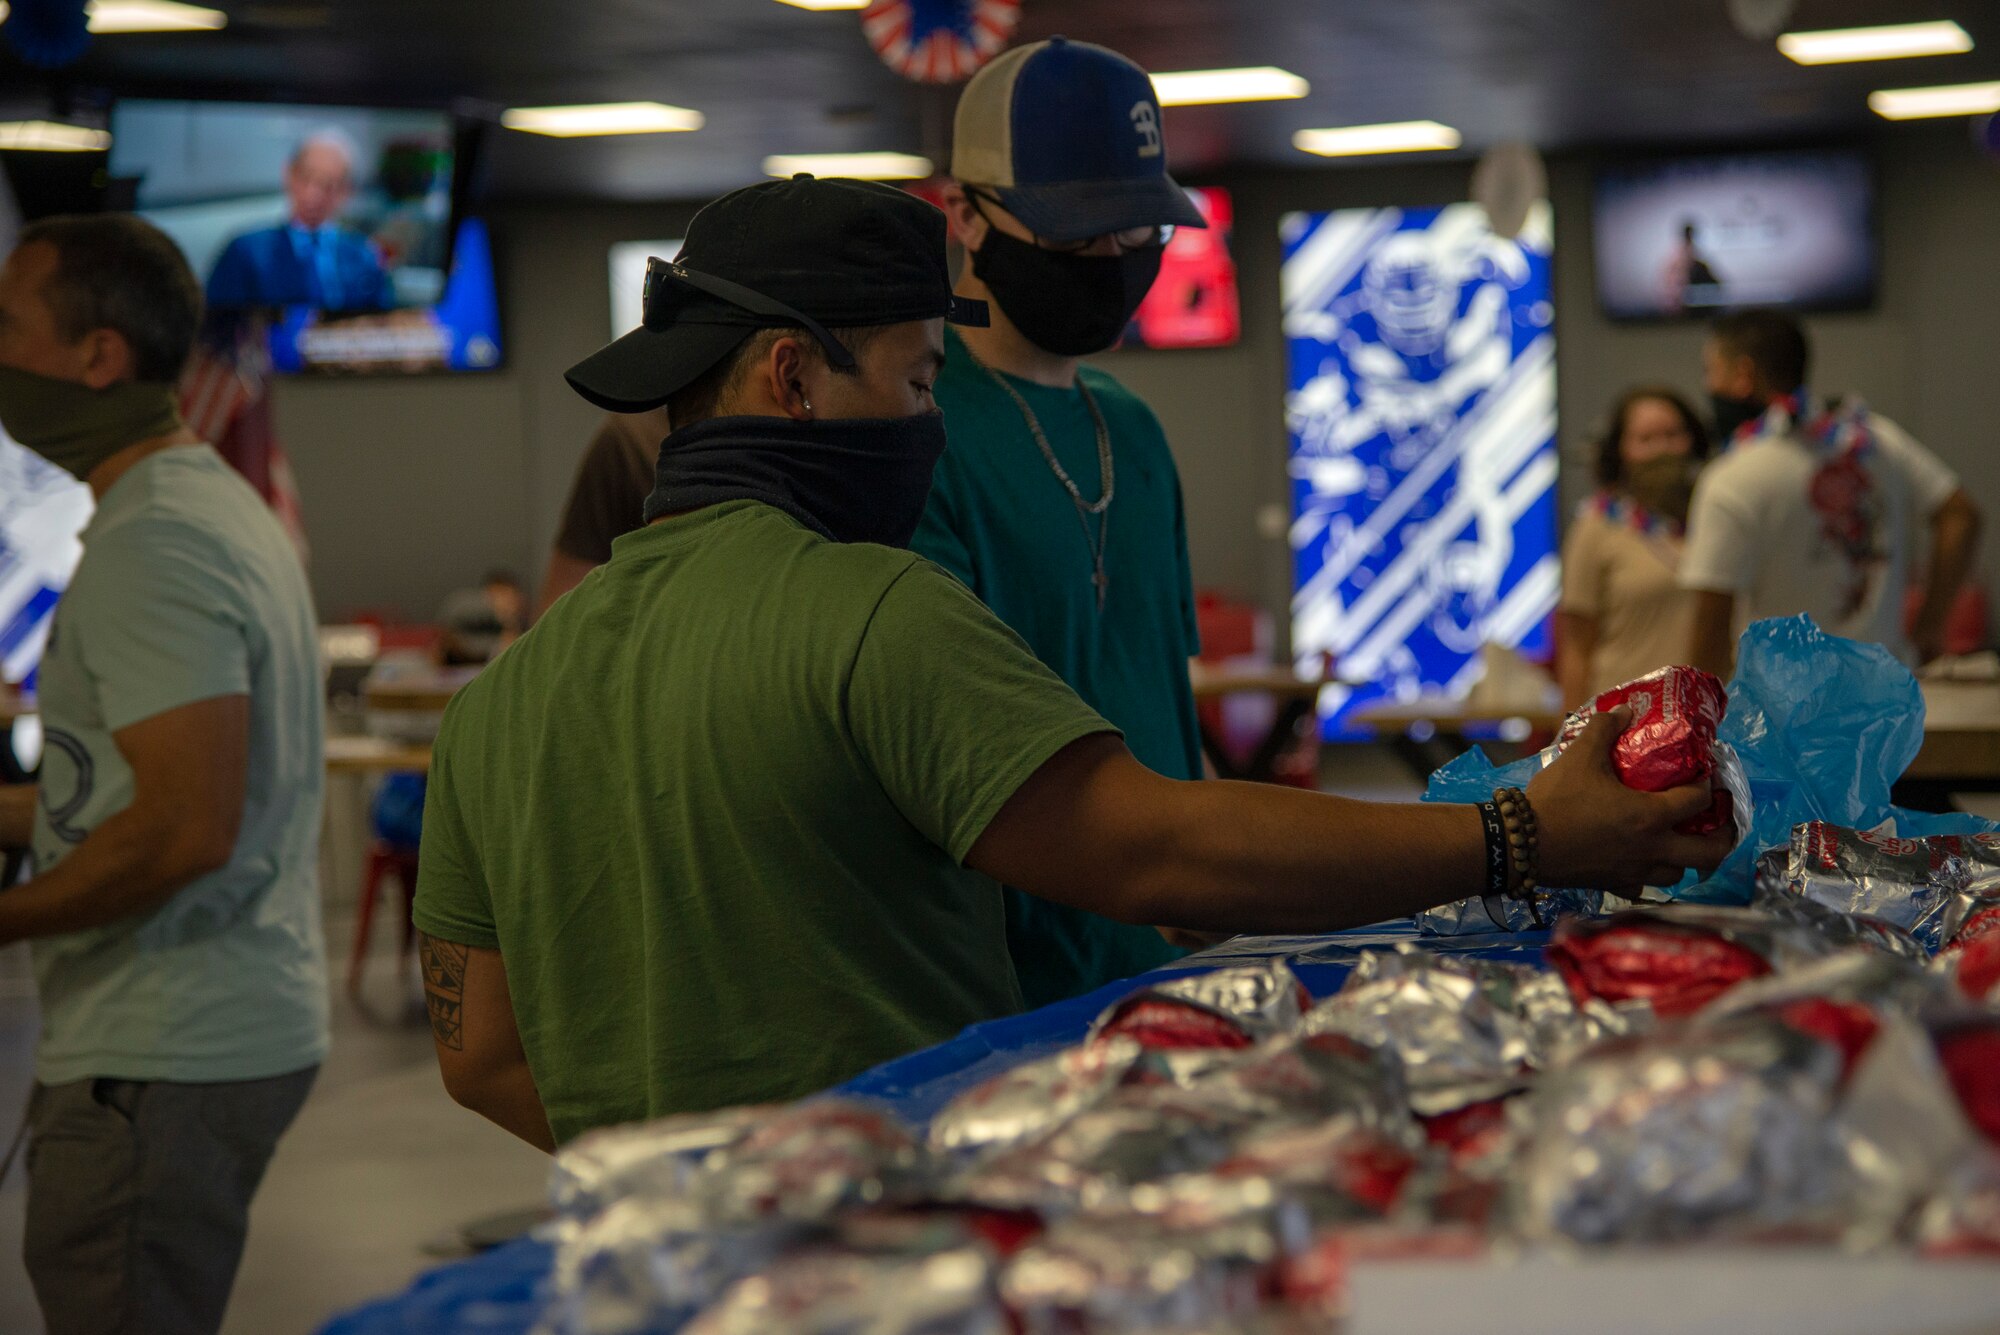 Two service members grab free food at the Fox Sports Bar during an Independence Day celebration, July 4, 2020, Al Udeid Air Base, Qatar. Food was provided free of charge to event attendees to celebrate America’s independence.